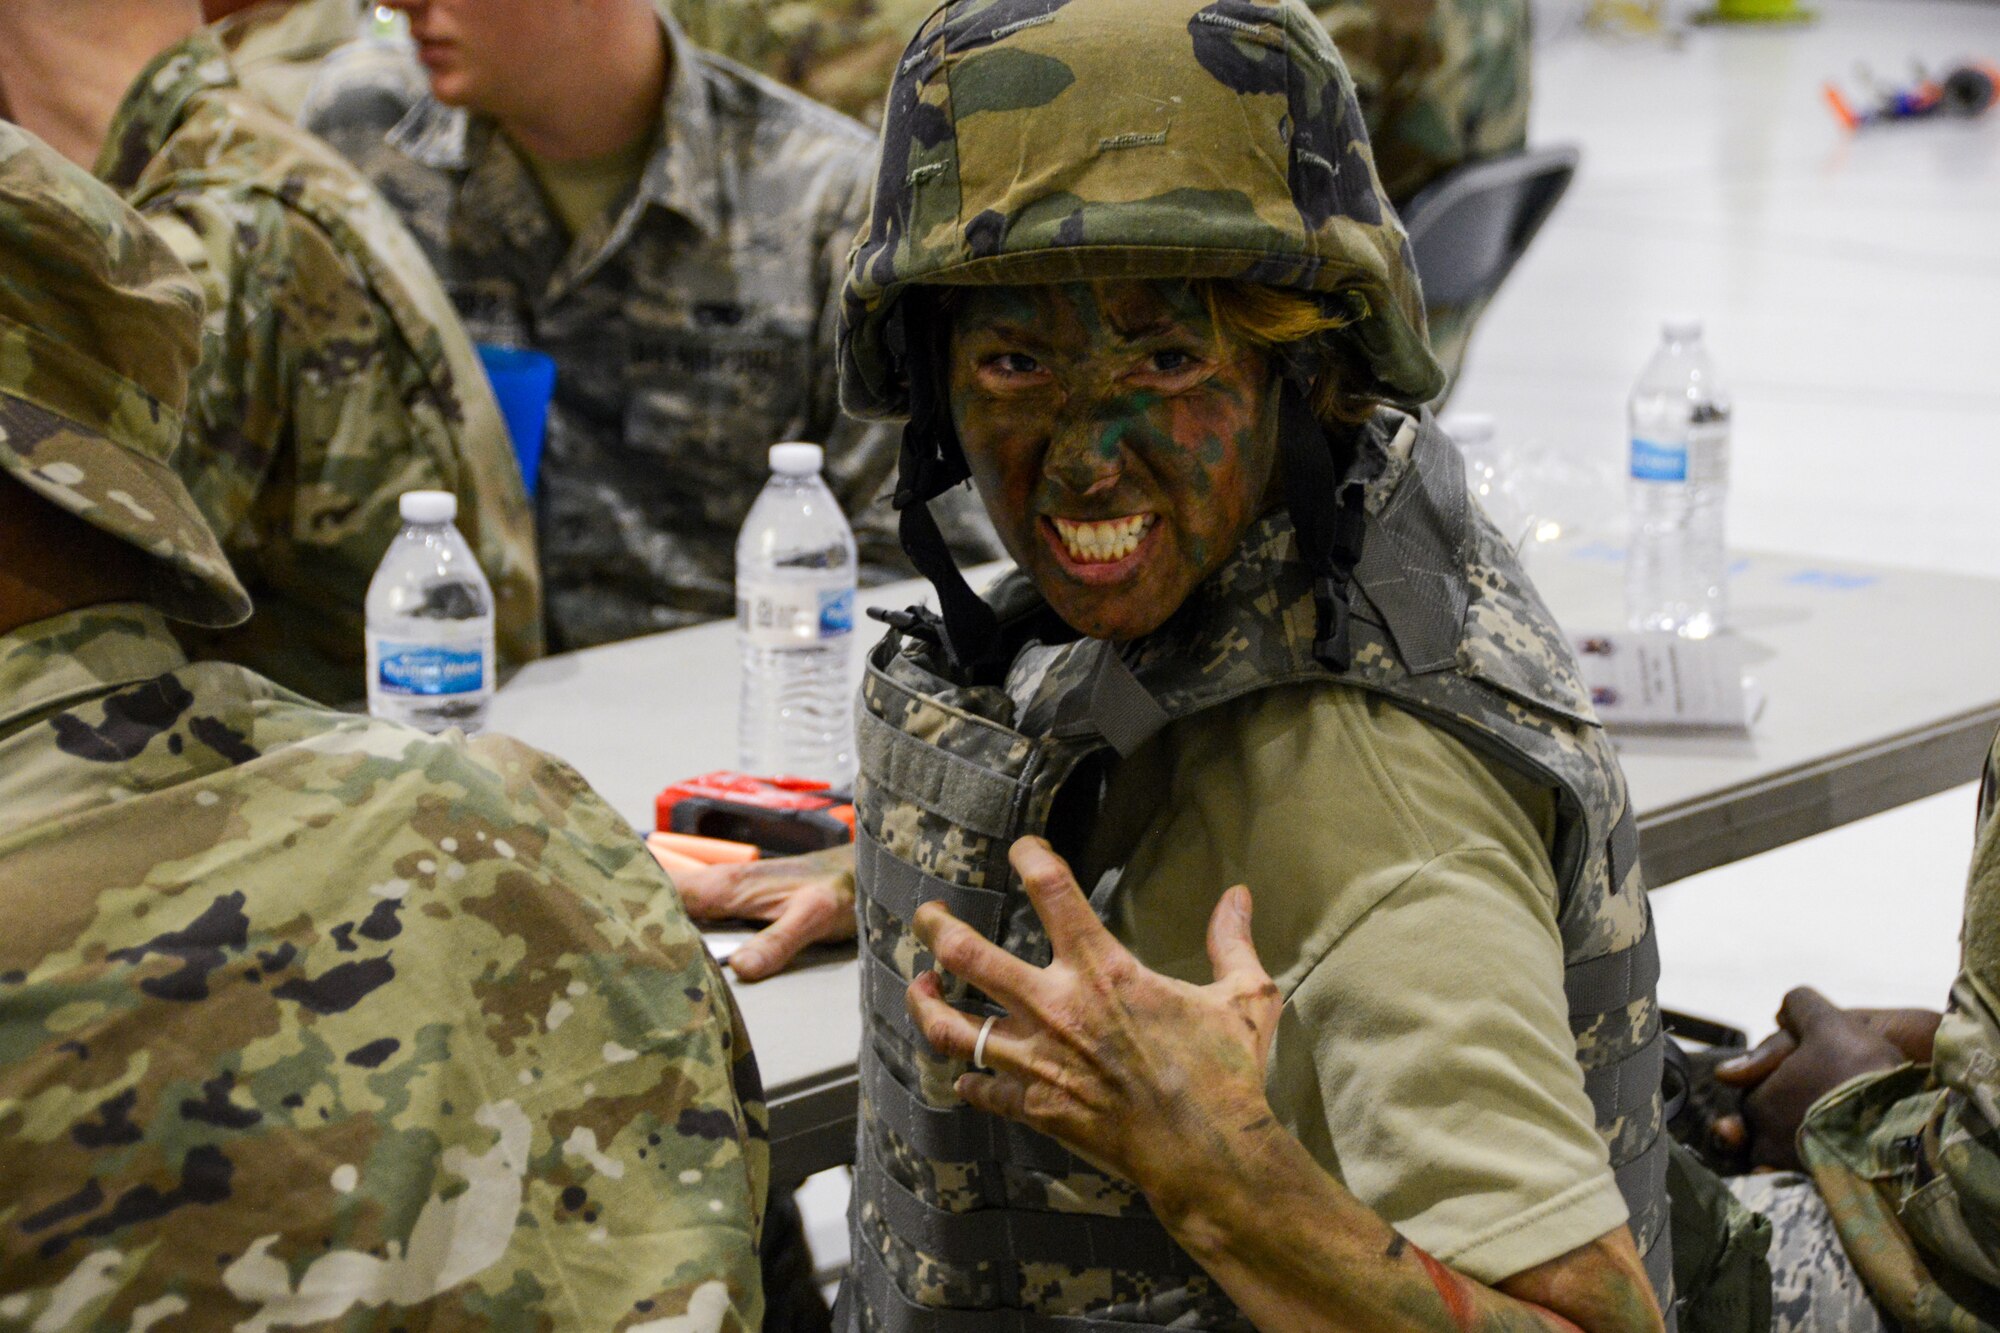 A Texas Air National Guard Airman in camouflage paint bares her teeth toward the camera.